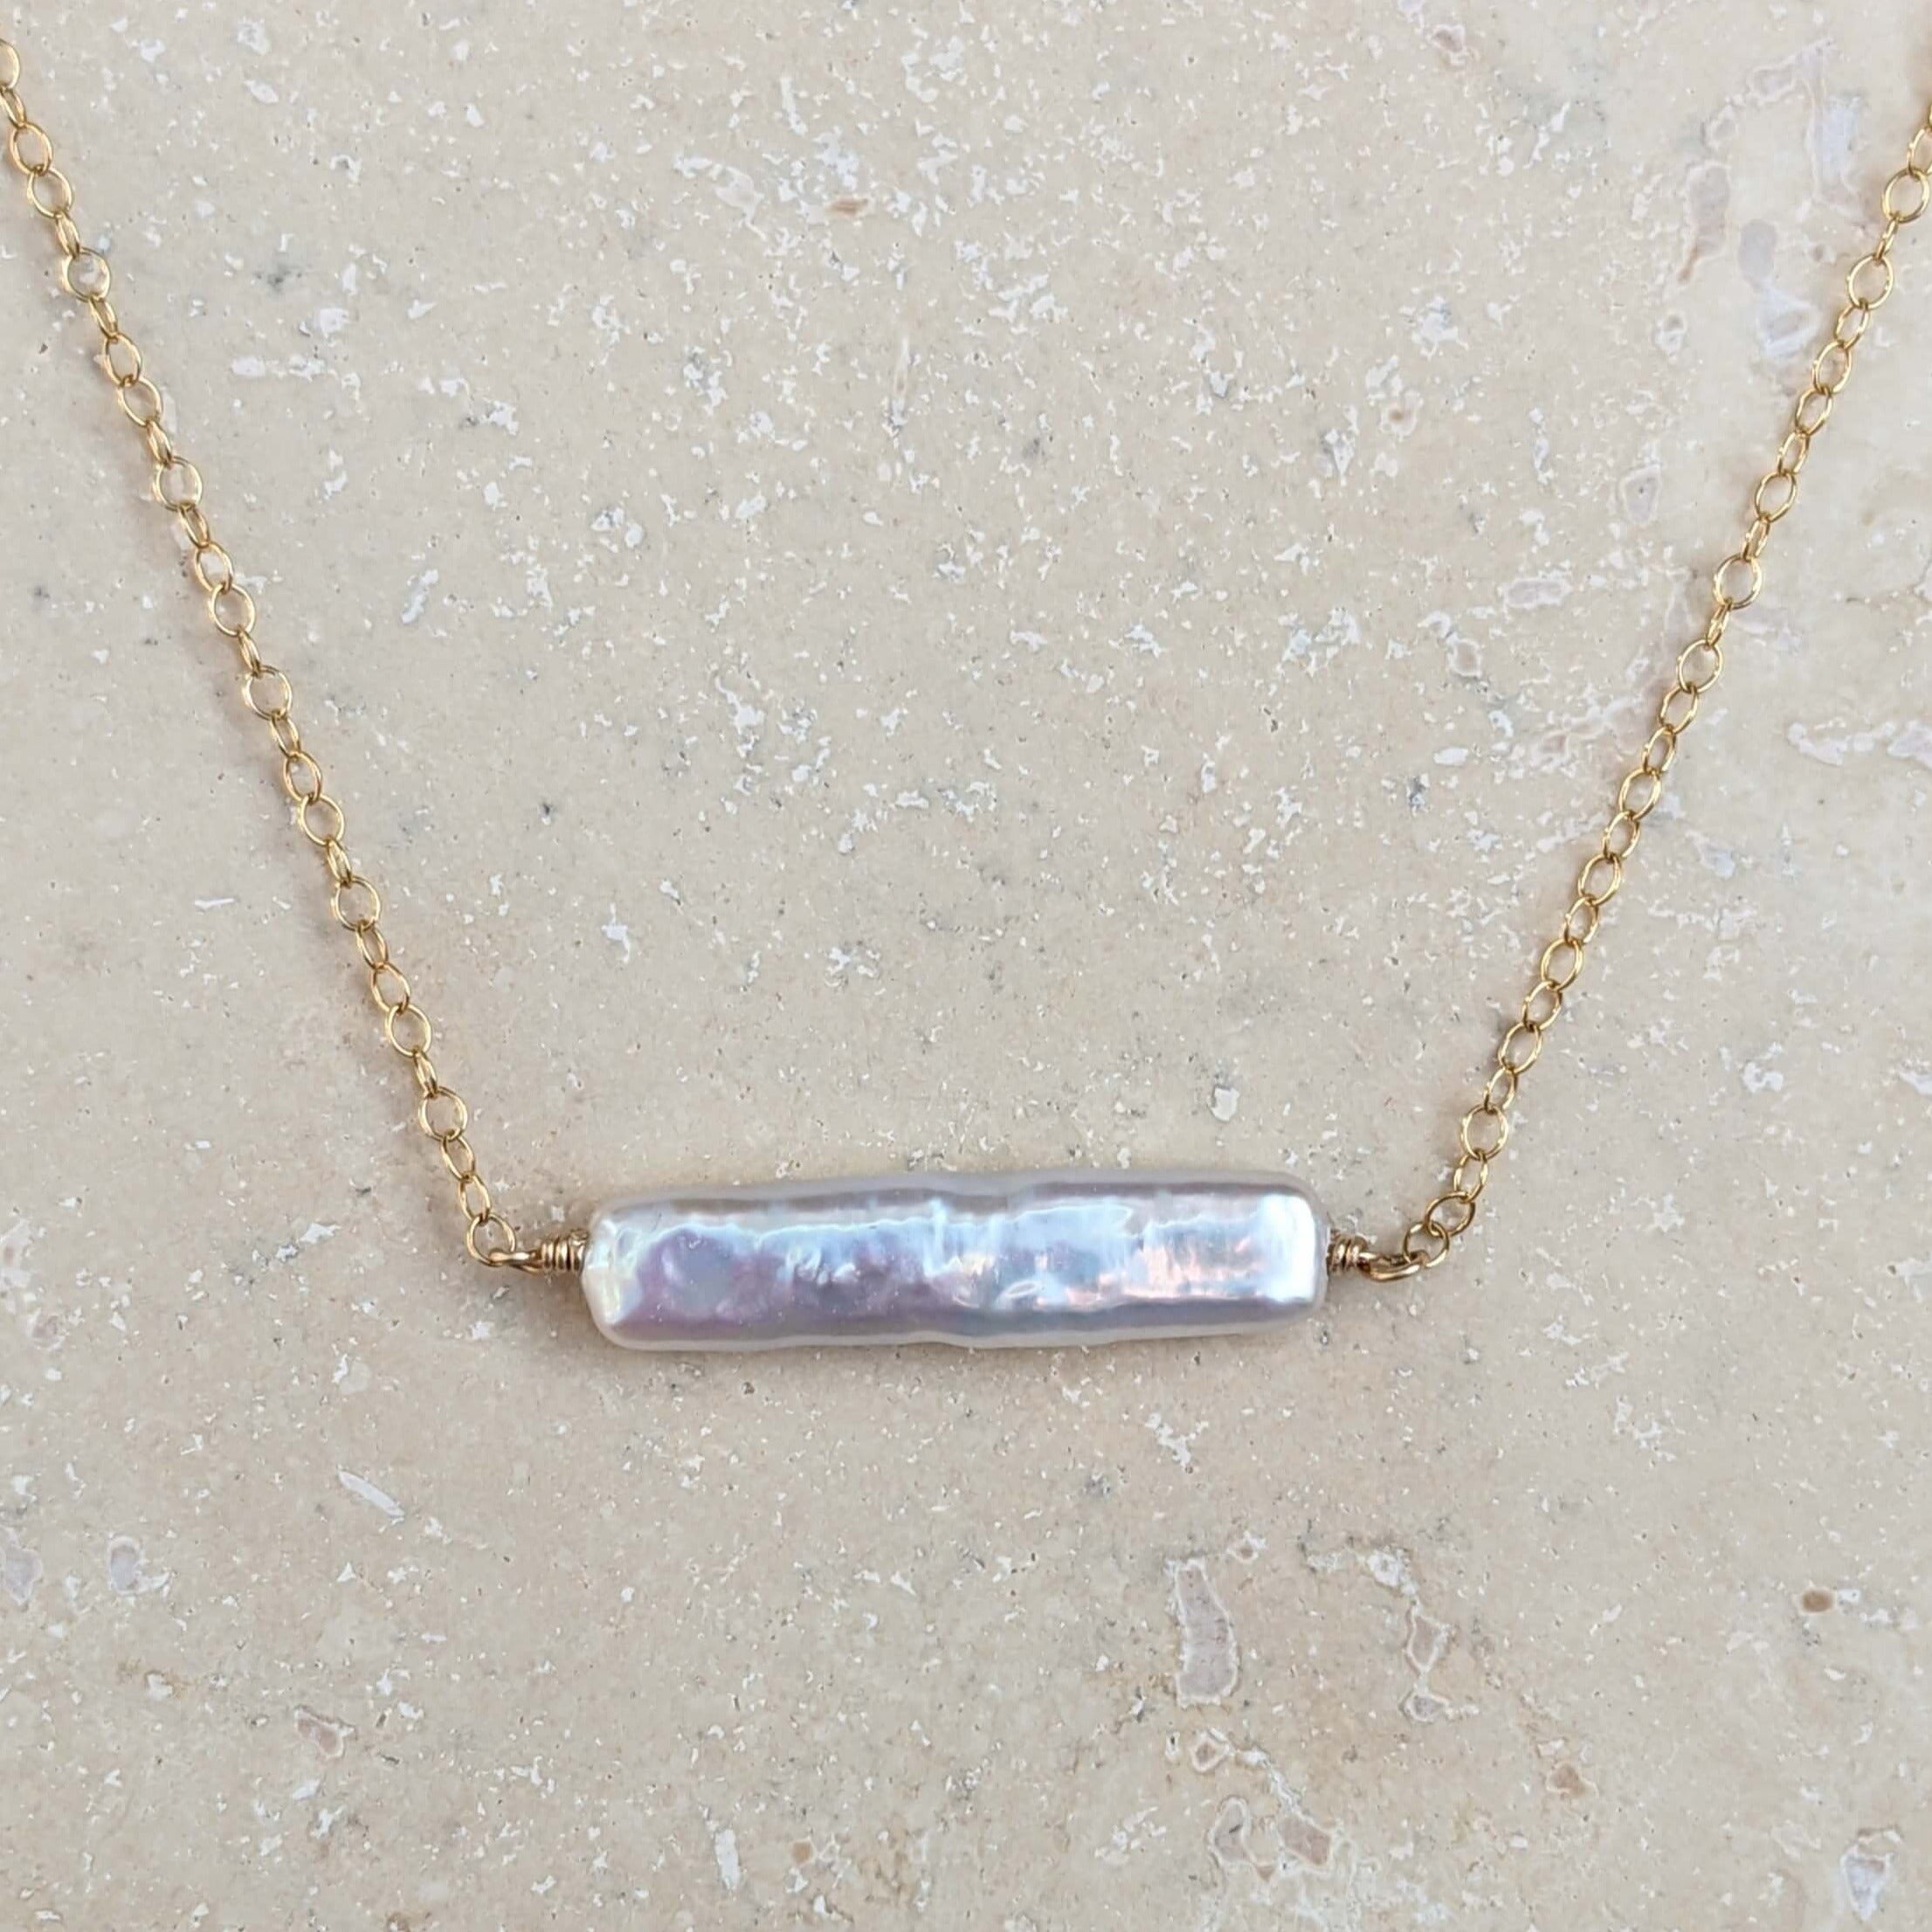 Rectangular pearl bar necklace with gold filled chain